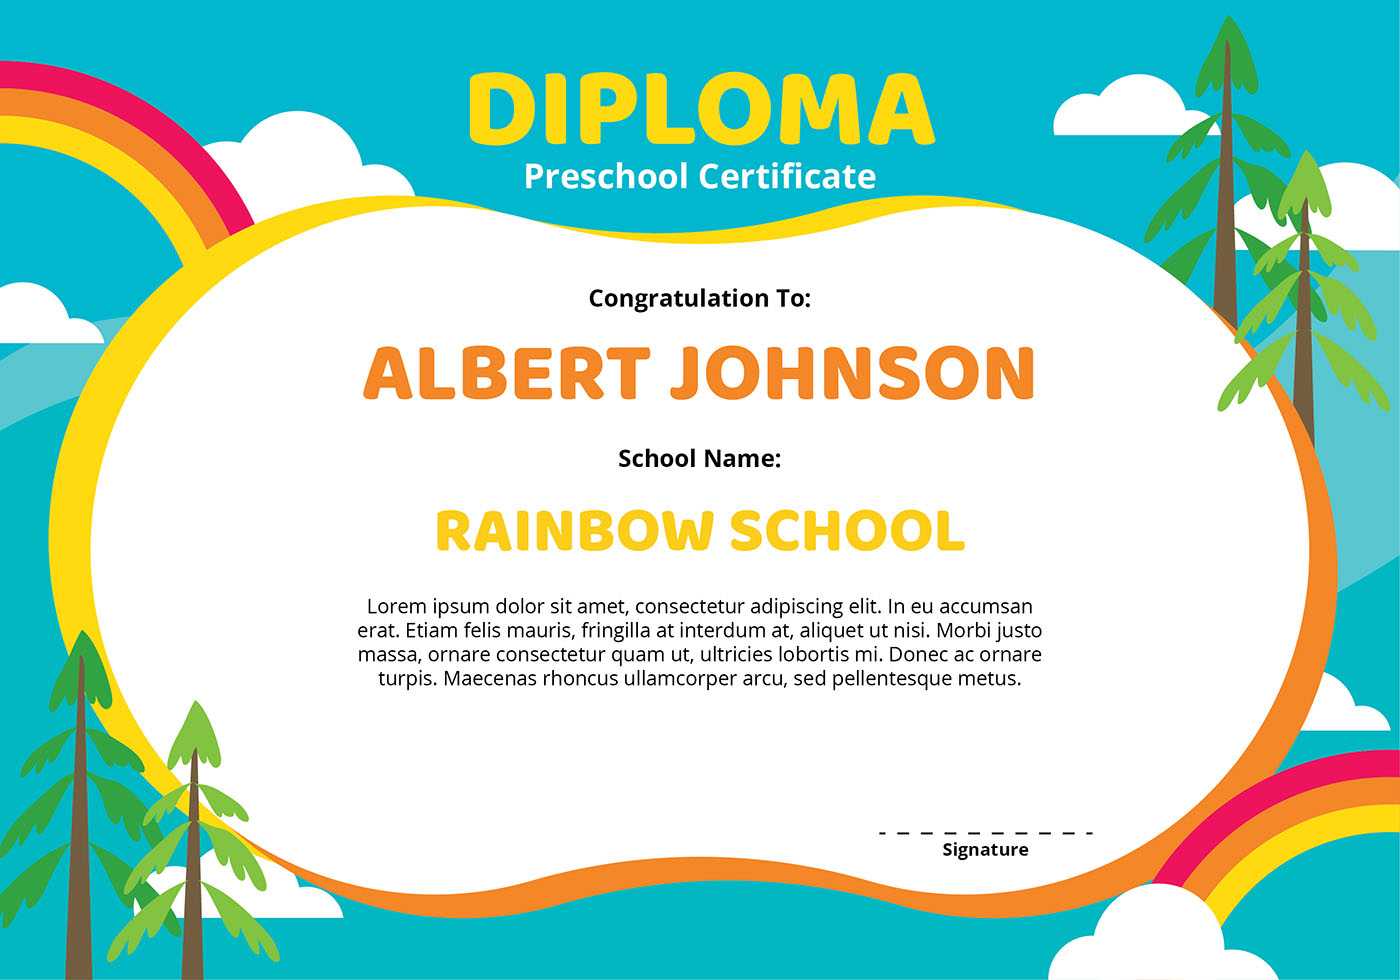 Diploma Preschool Certificate Template – Download Free For Classroom Certificates Templates